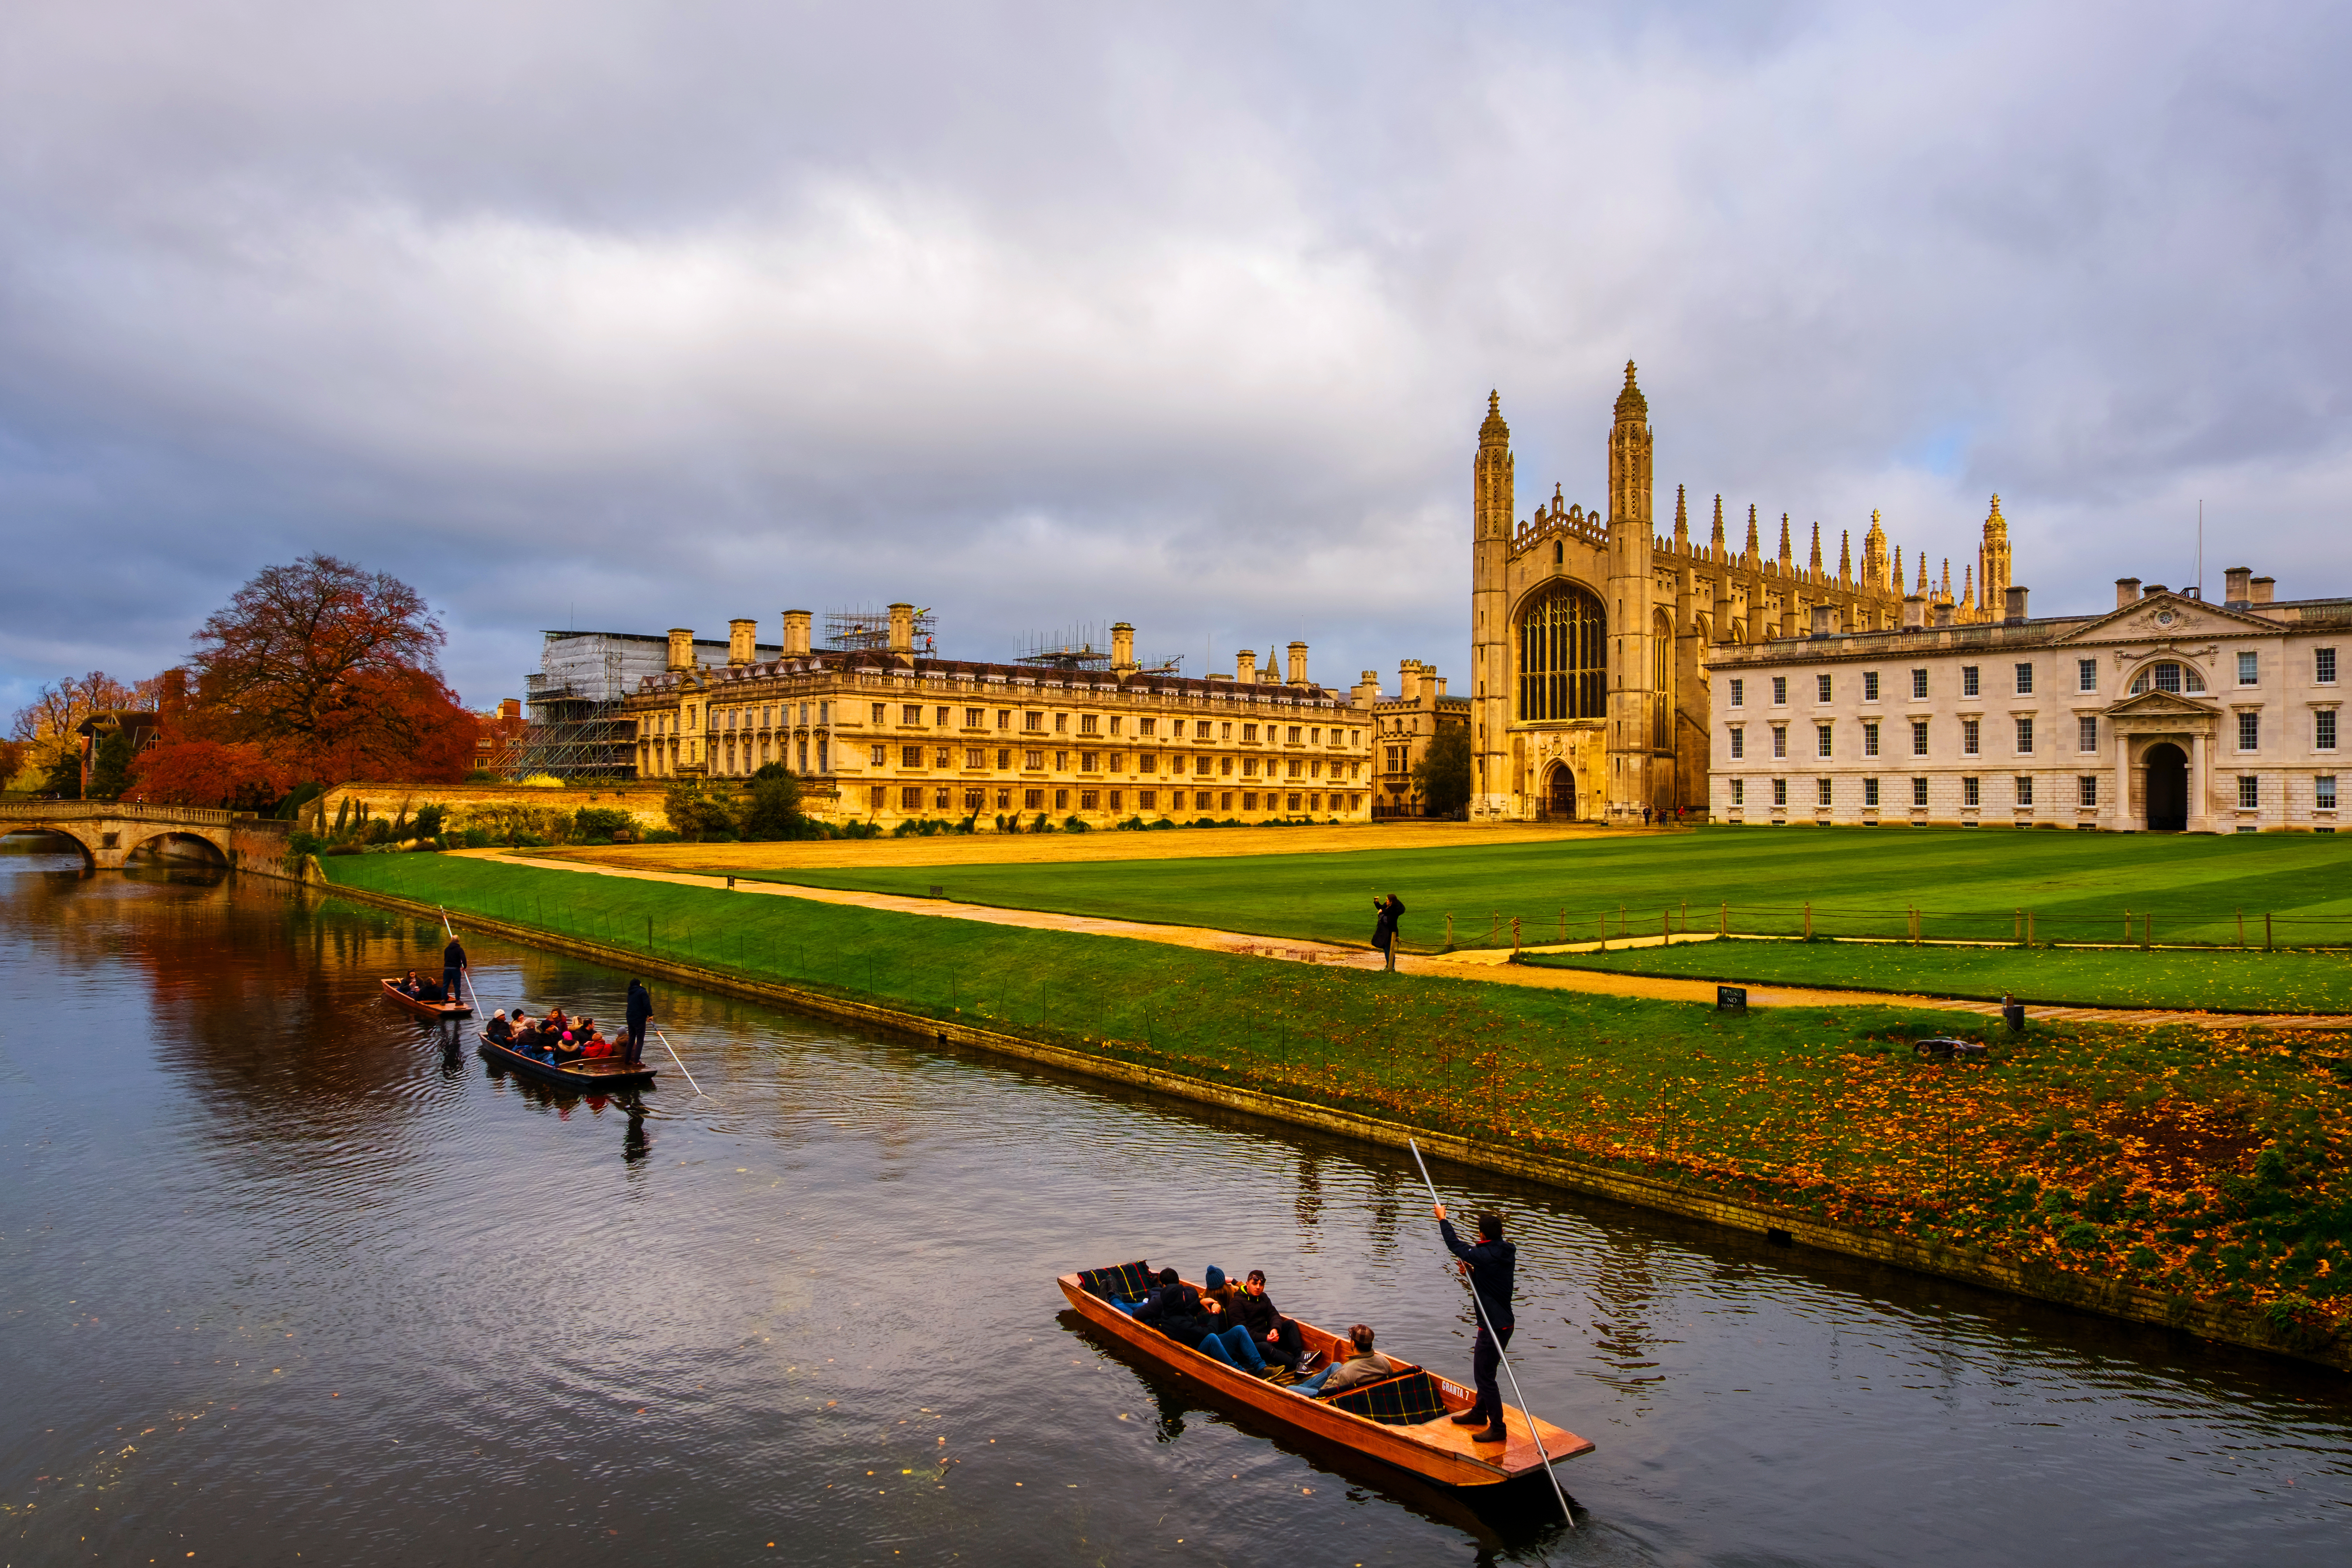 Cambridge University announced it will not resume face-to-face lectures until at least summer 2021.